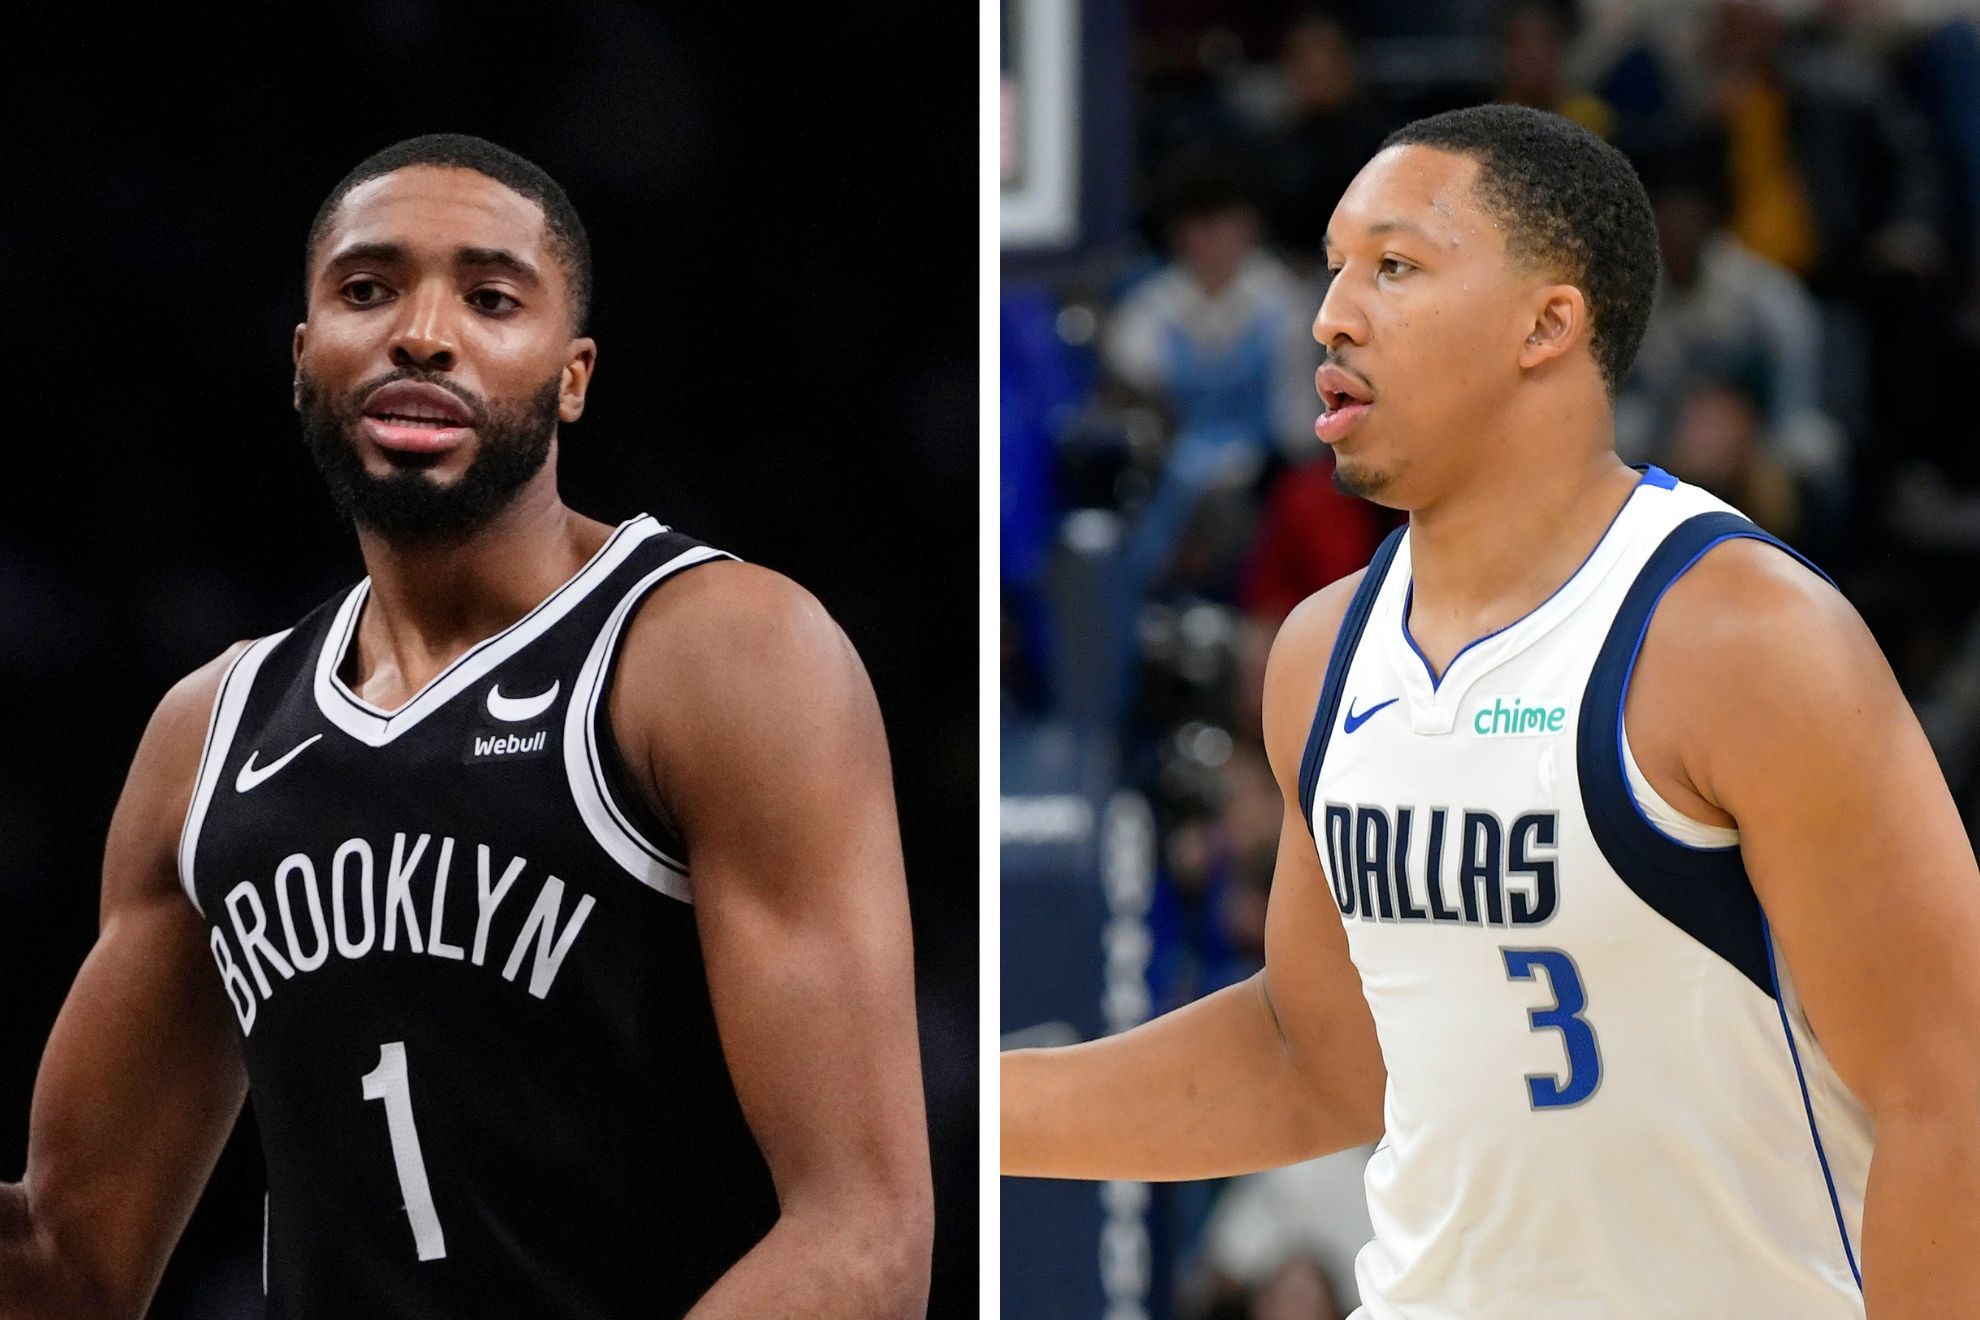 Grant Williams exposes Mikal Bridges, who says he didn't have sex with Nets cheerleader